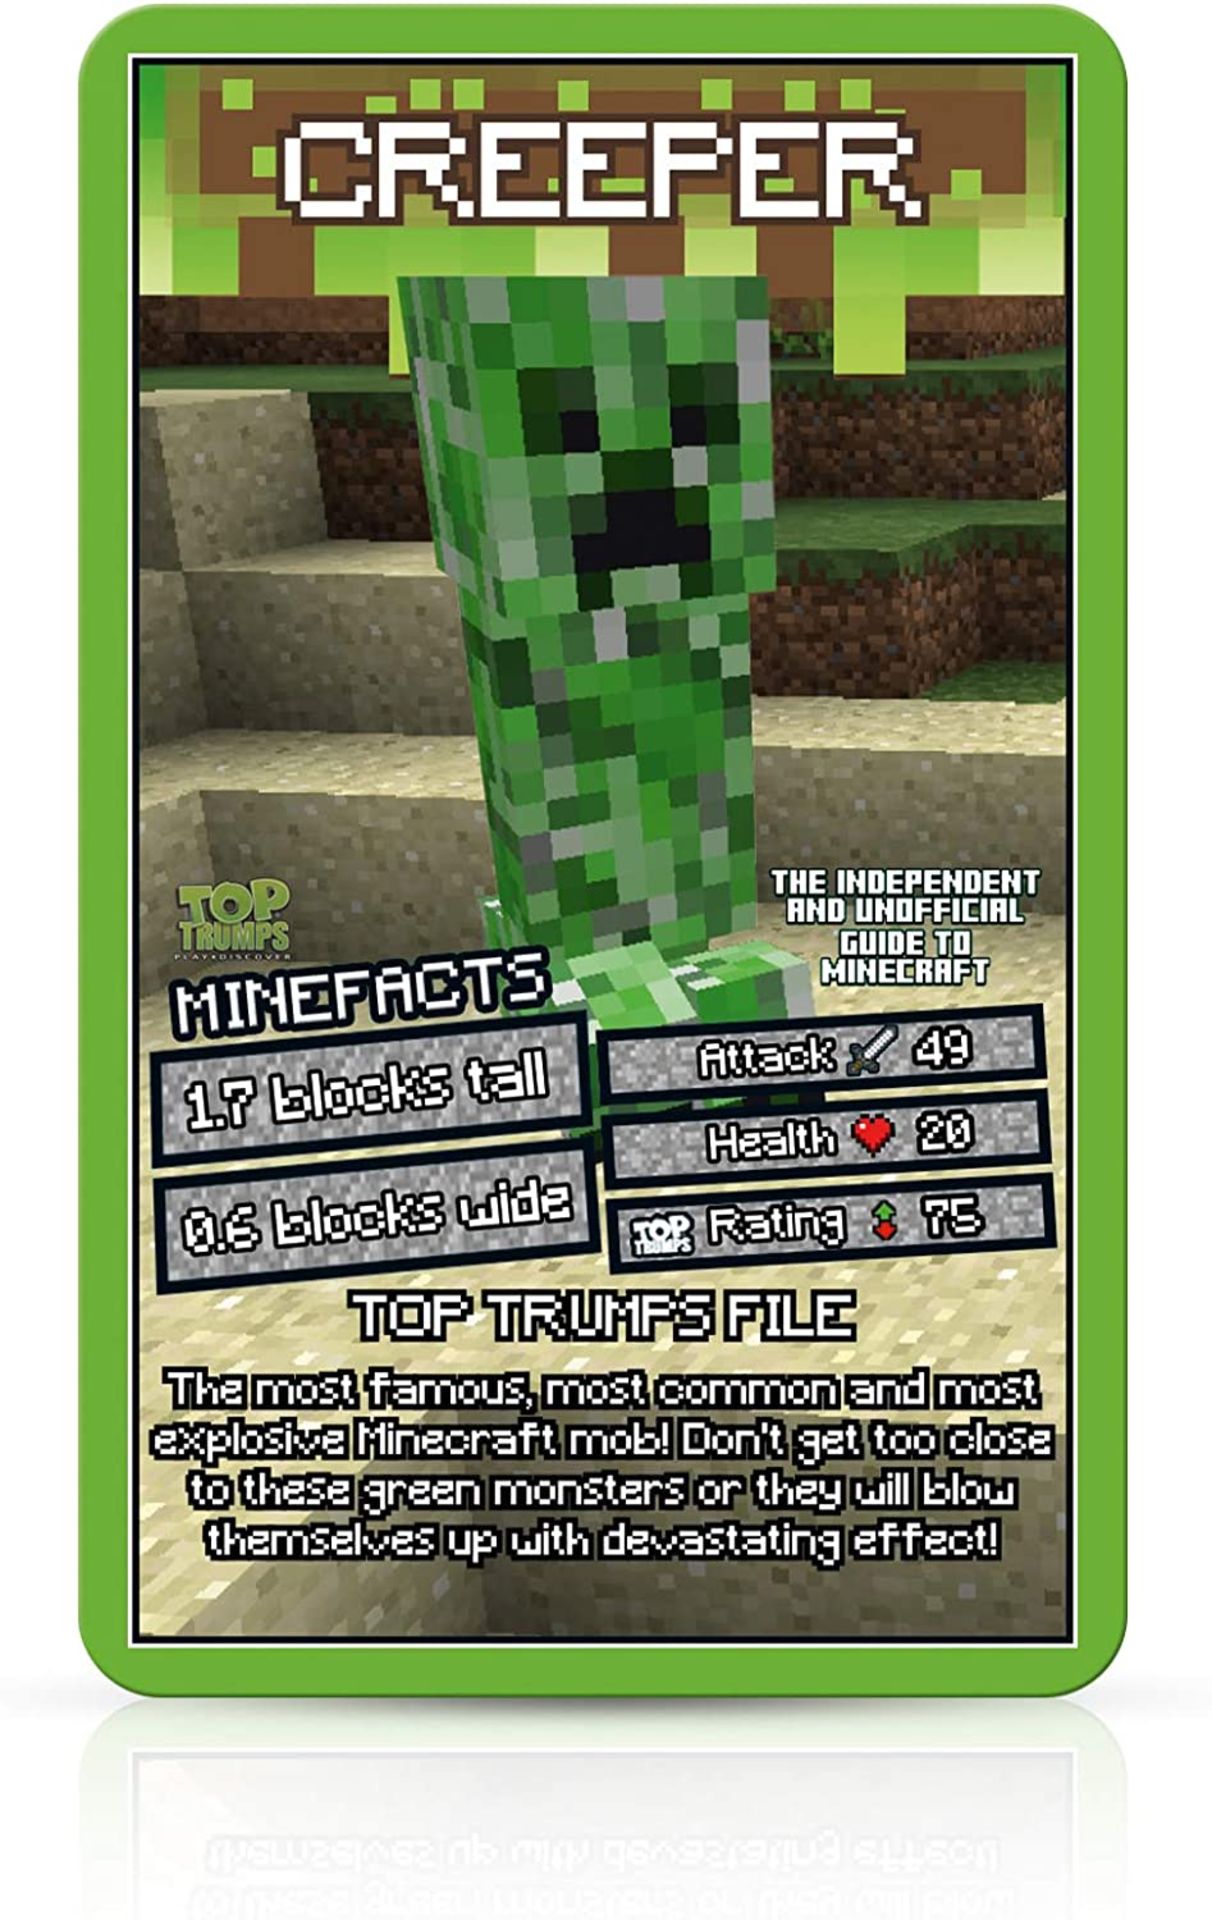 30 x Top Trumps 037310 The Unofficial and Independent Guide to Minecraft Card Game, Green |503690503 - Image 4 of 7